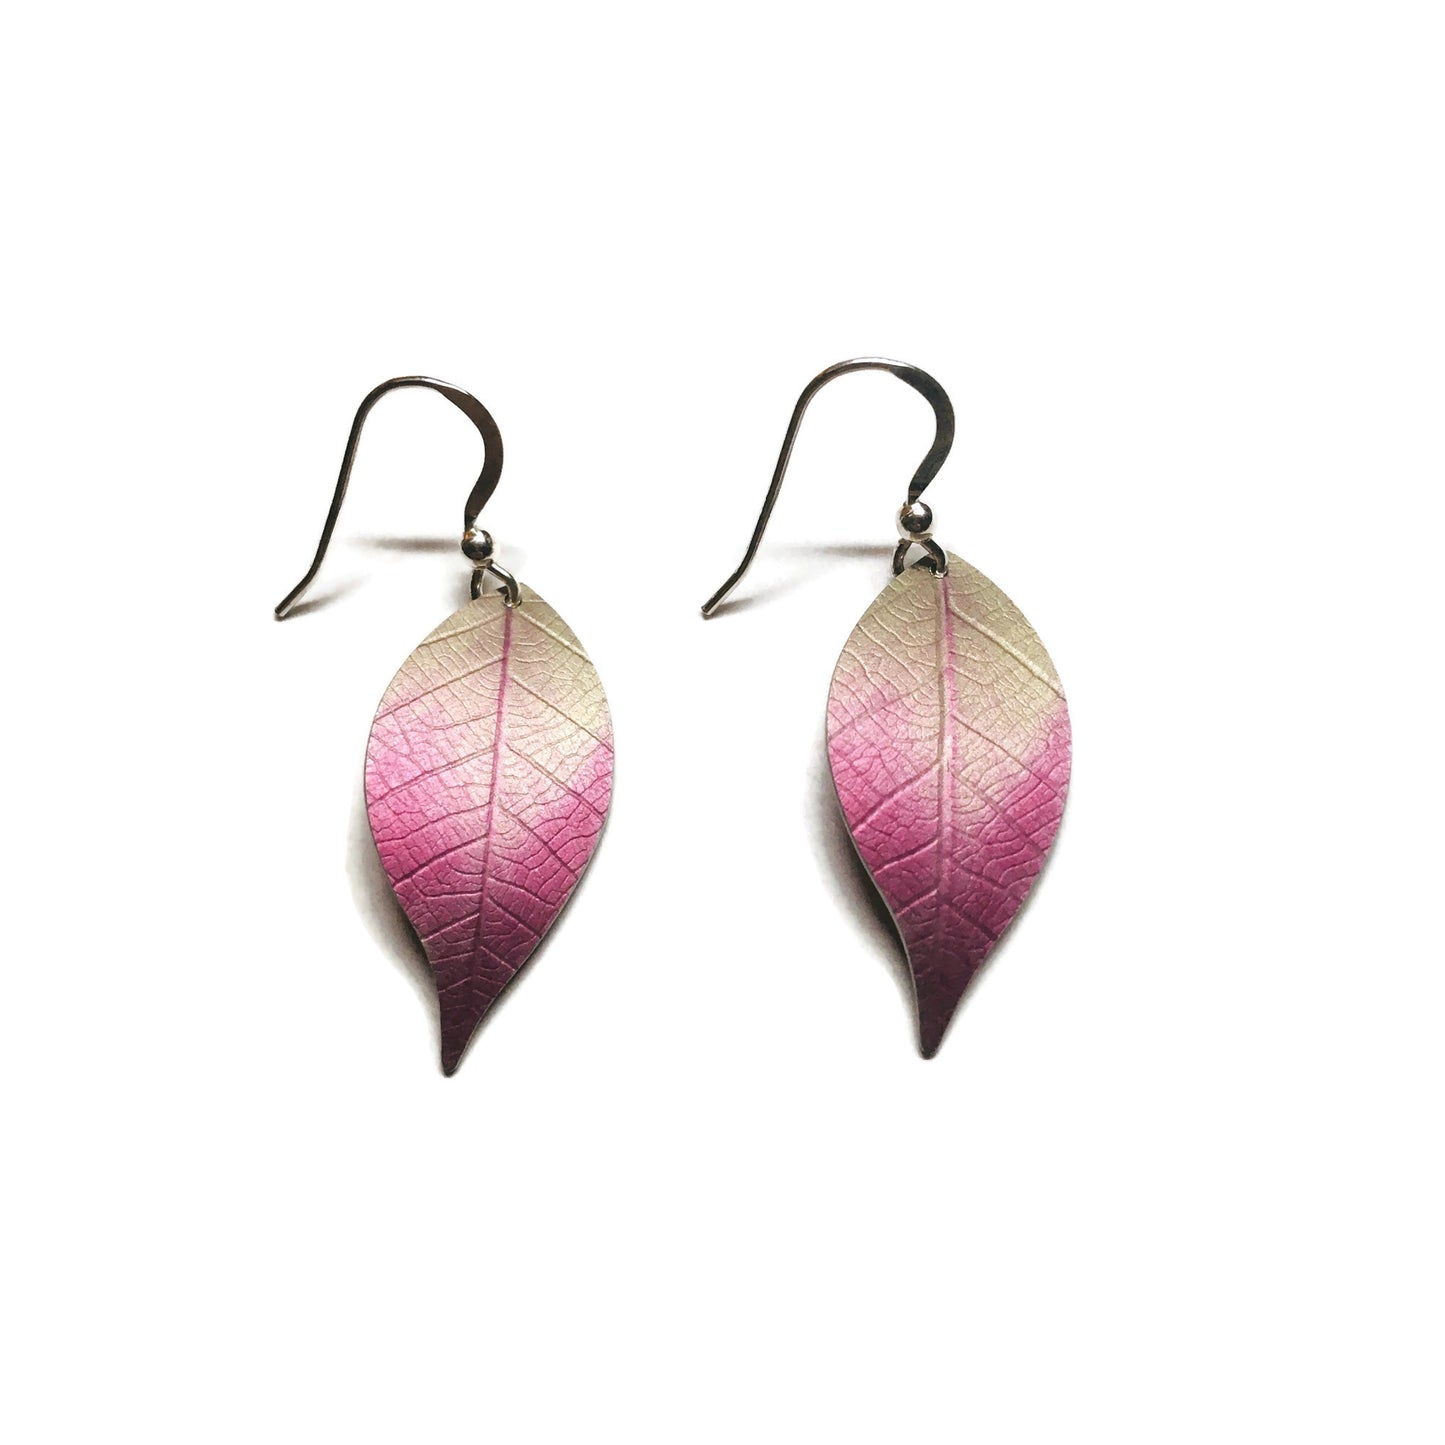 Pink Cherry leaf earrings by Photofinish Jewellery